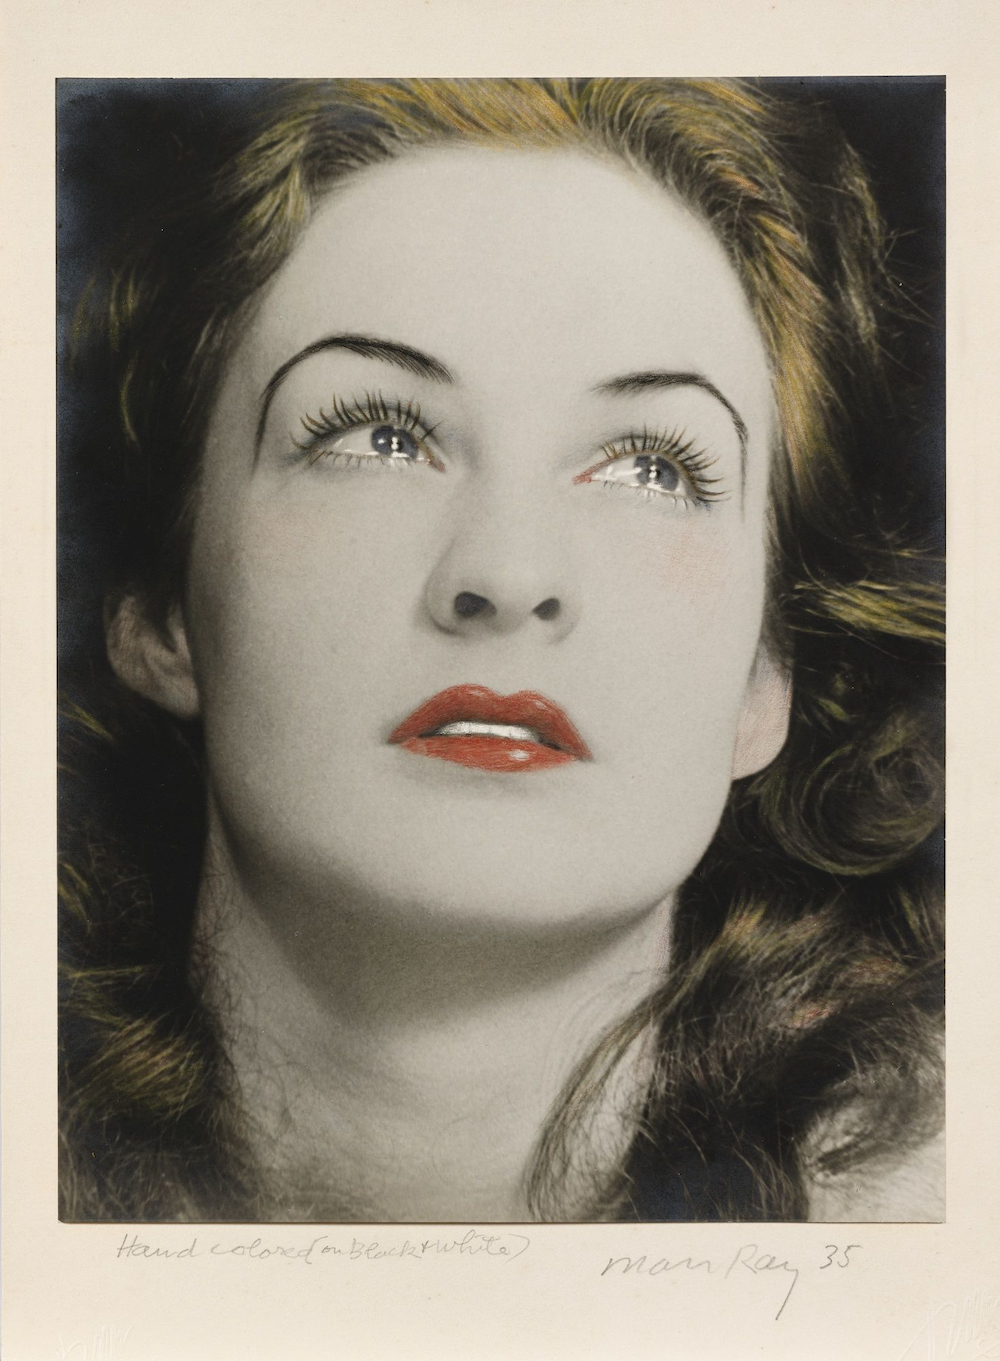 Man Ray's Portrait of a Tearful Woman